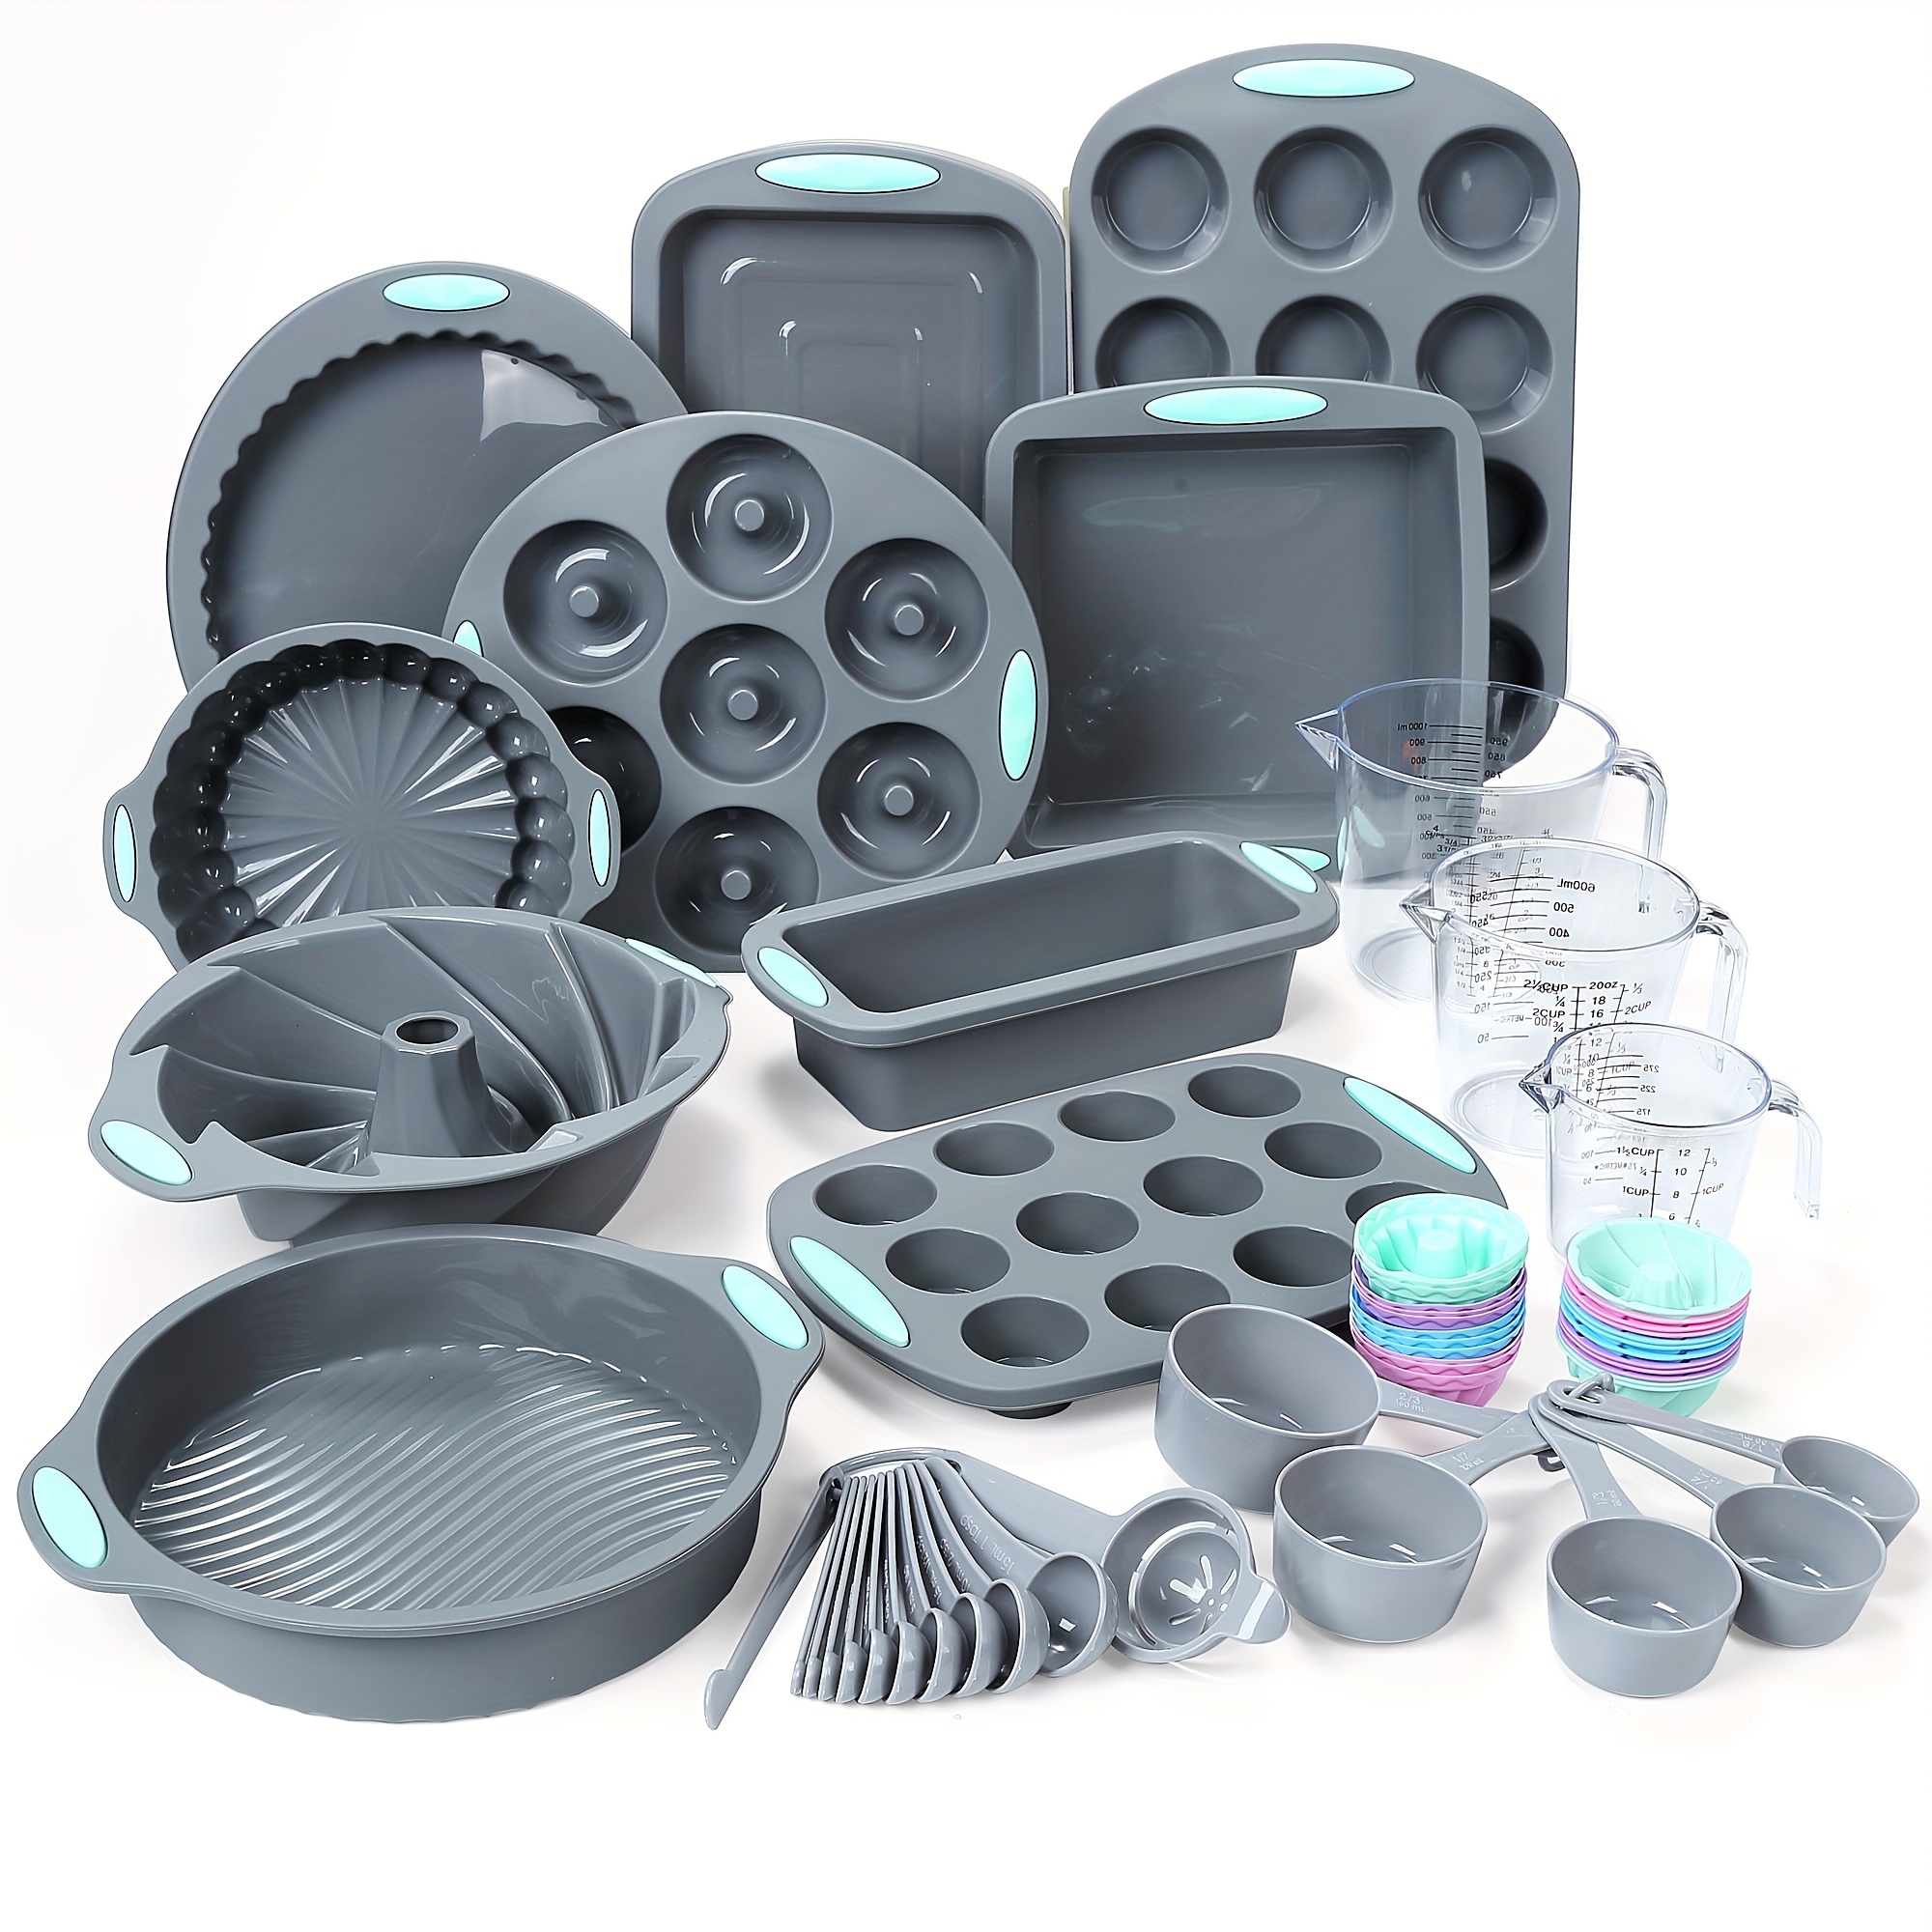 

54/47 Pieces Silicone Baking Pan Set, Silicone Cake Molds, Baking Sheet, Donut Pan, Silicone Muffin Pan With 24 Pack Silicone Baking Cups, Dishwasher Safe